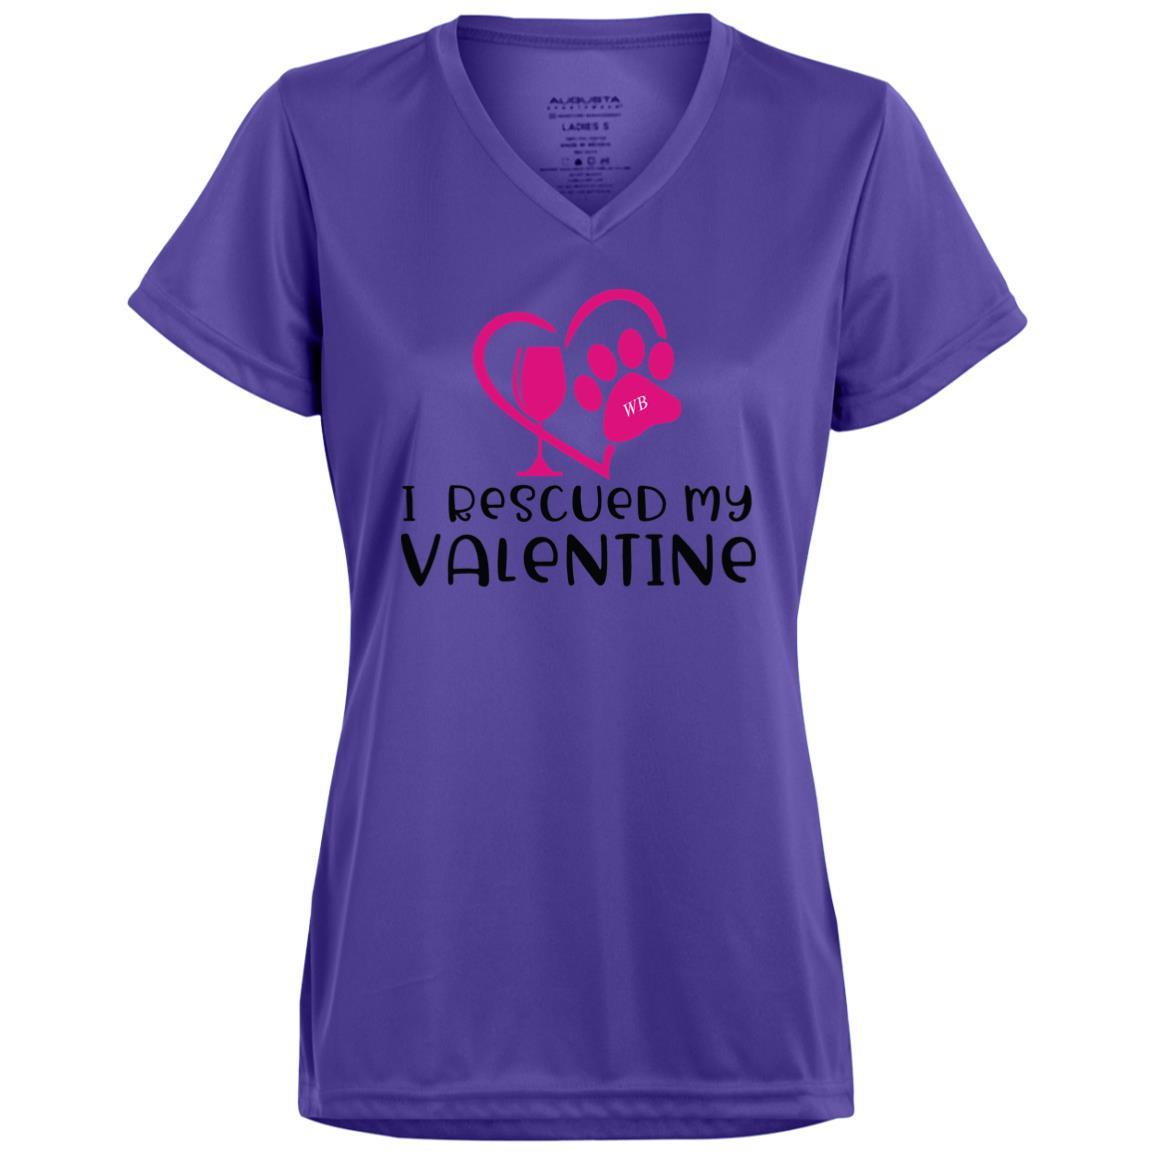 T-Shirts Purple / X-Small Winey Bitches Co "I Rescued My Valentine" Ladies' Wicking T-Shirt WineyBitchesCo